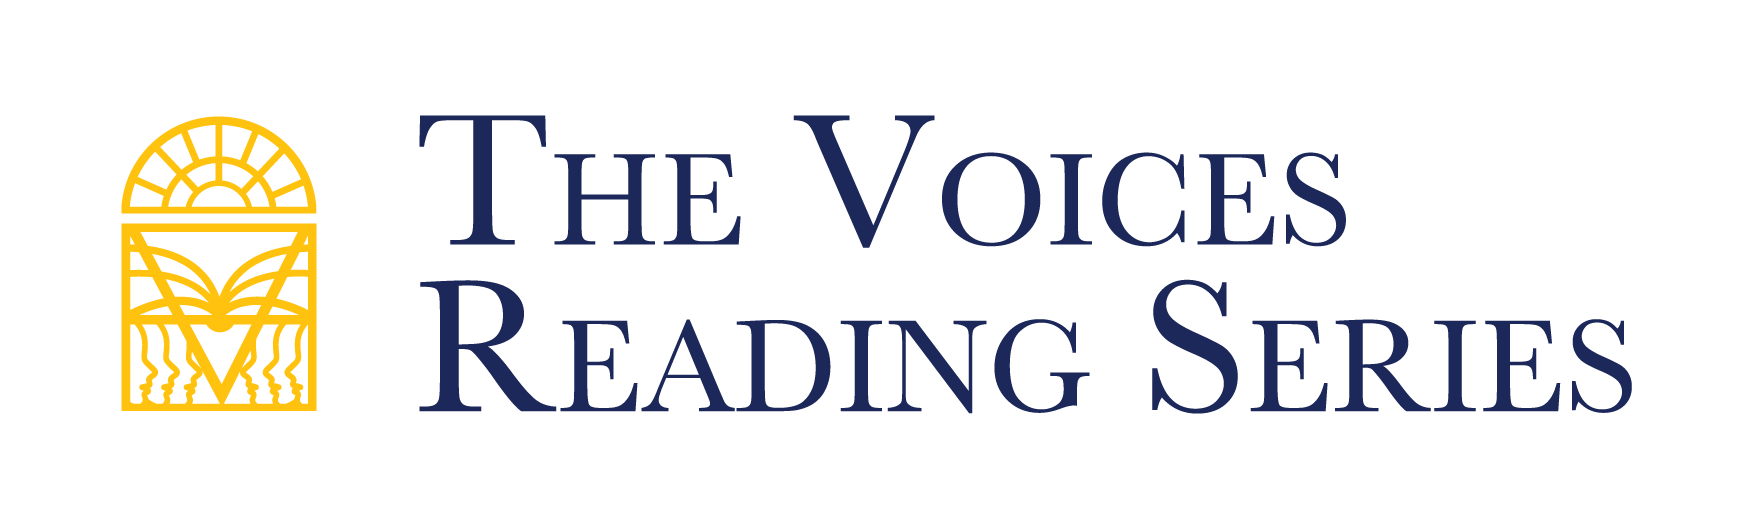 The Voices Reading Series, logo